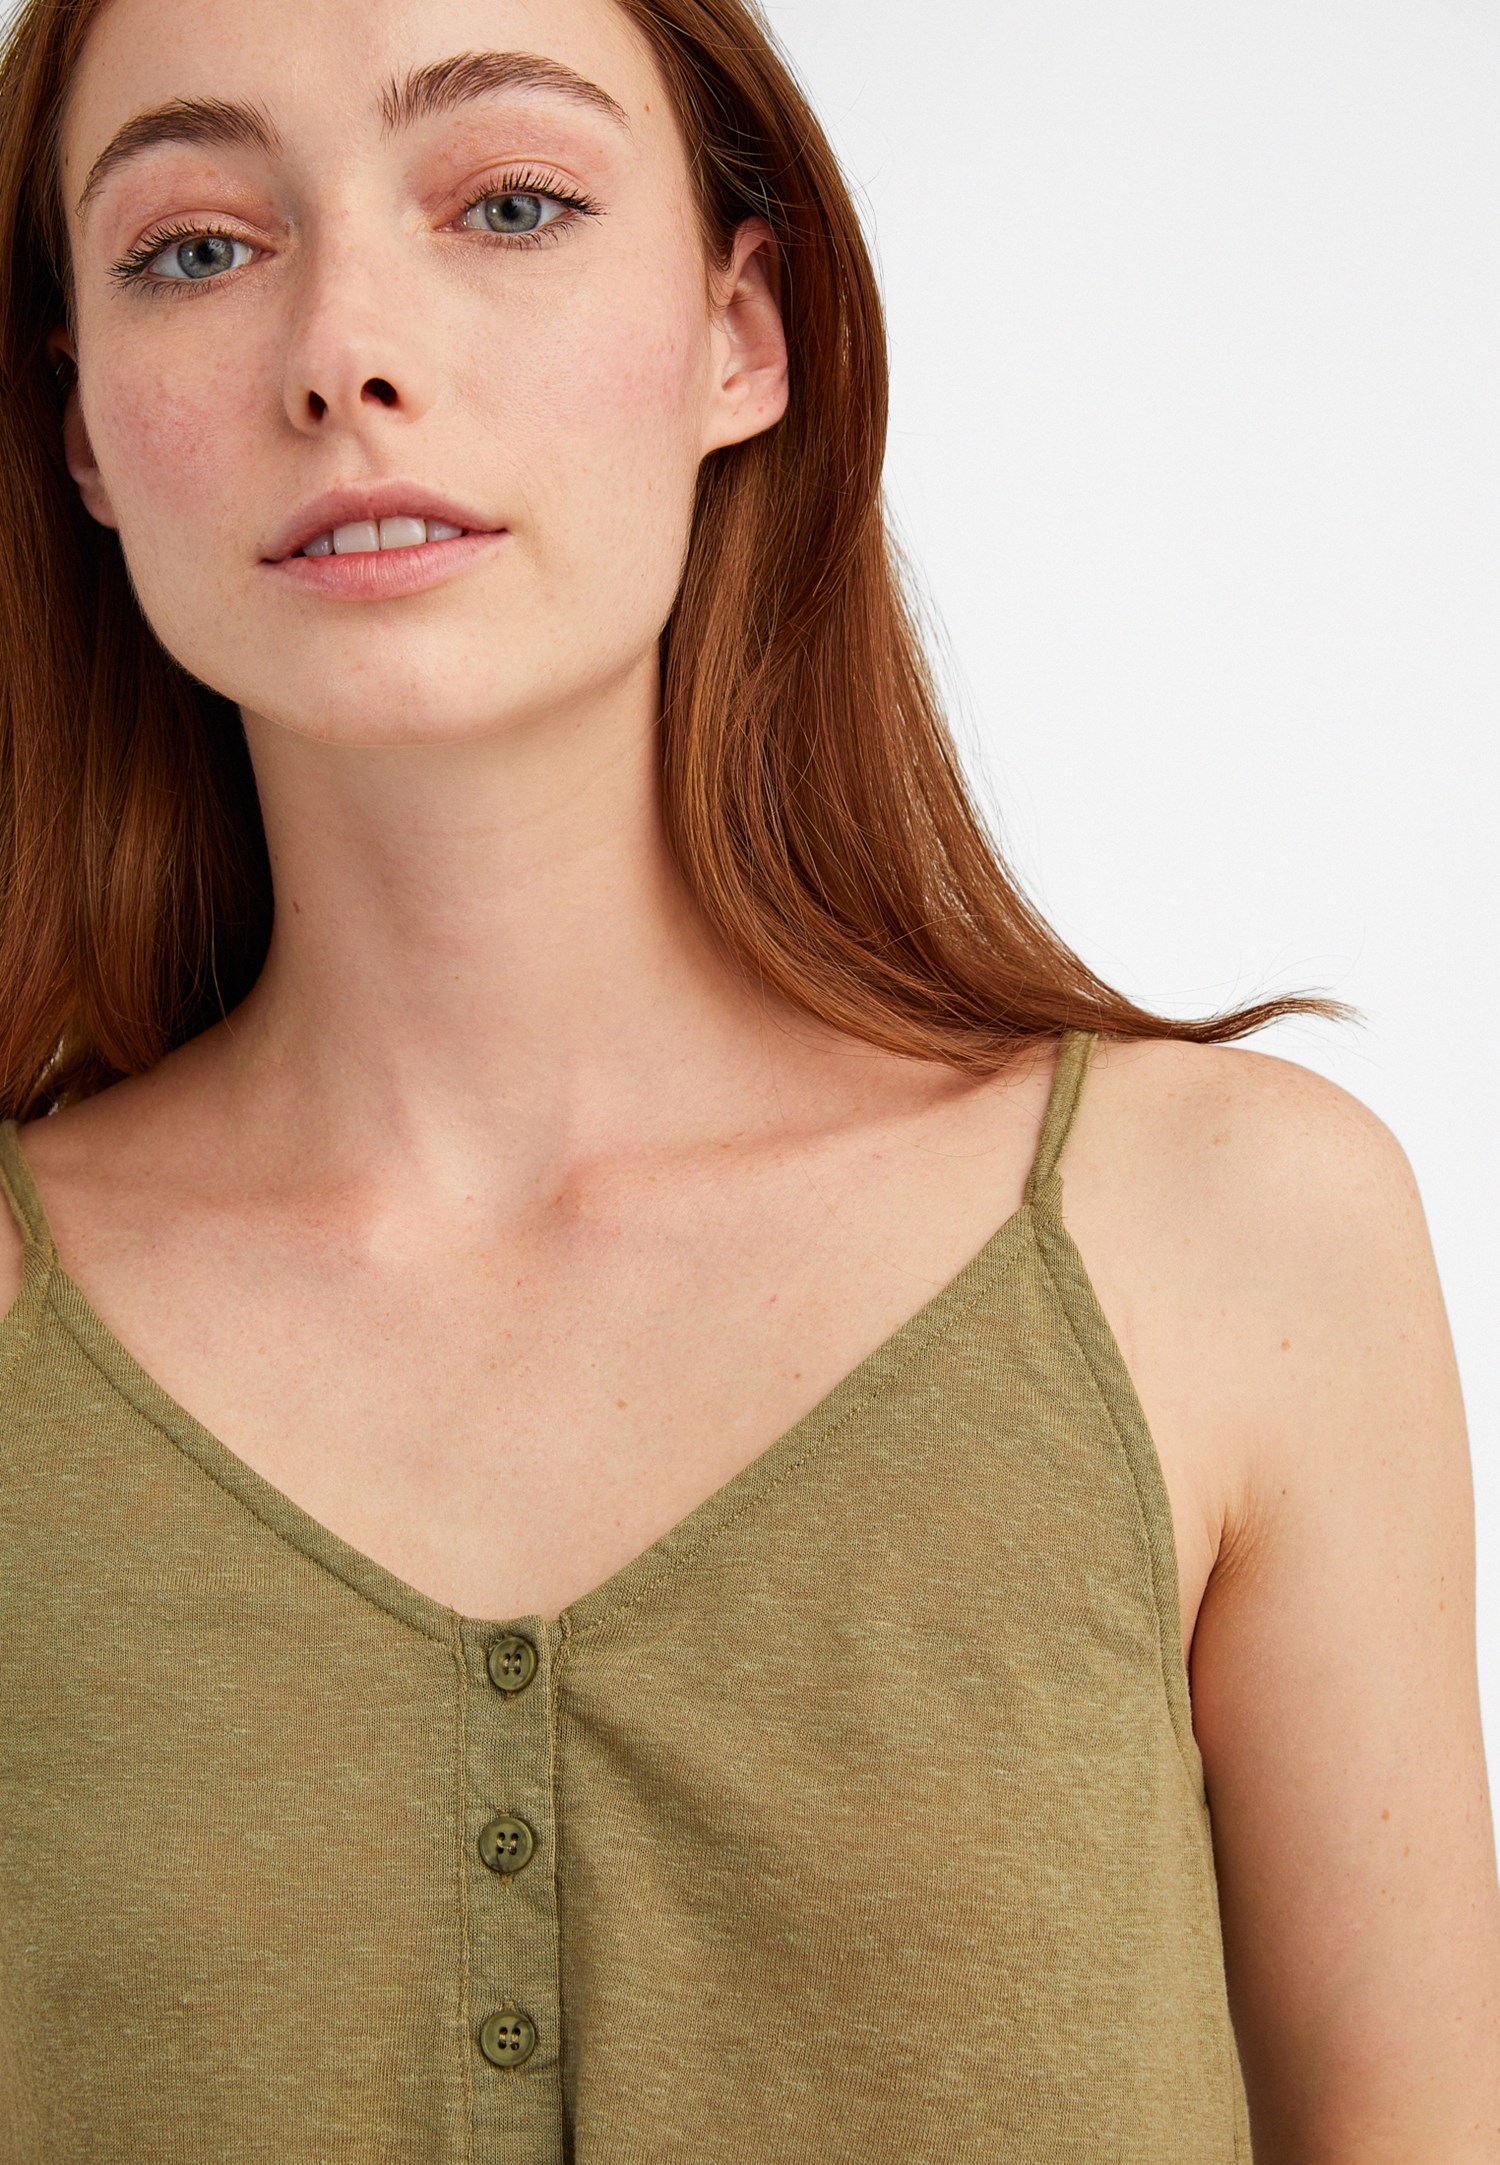 Women Green V-Neck Top with Tie Detail